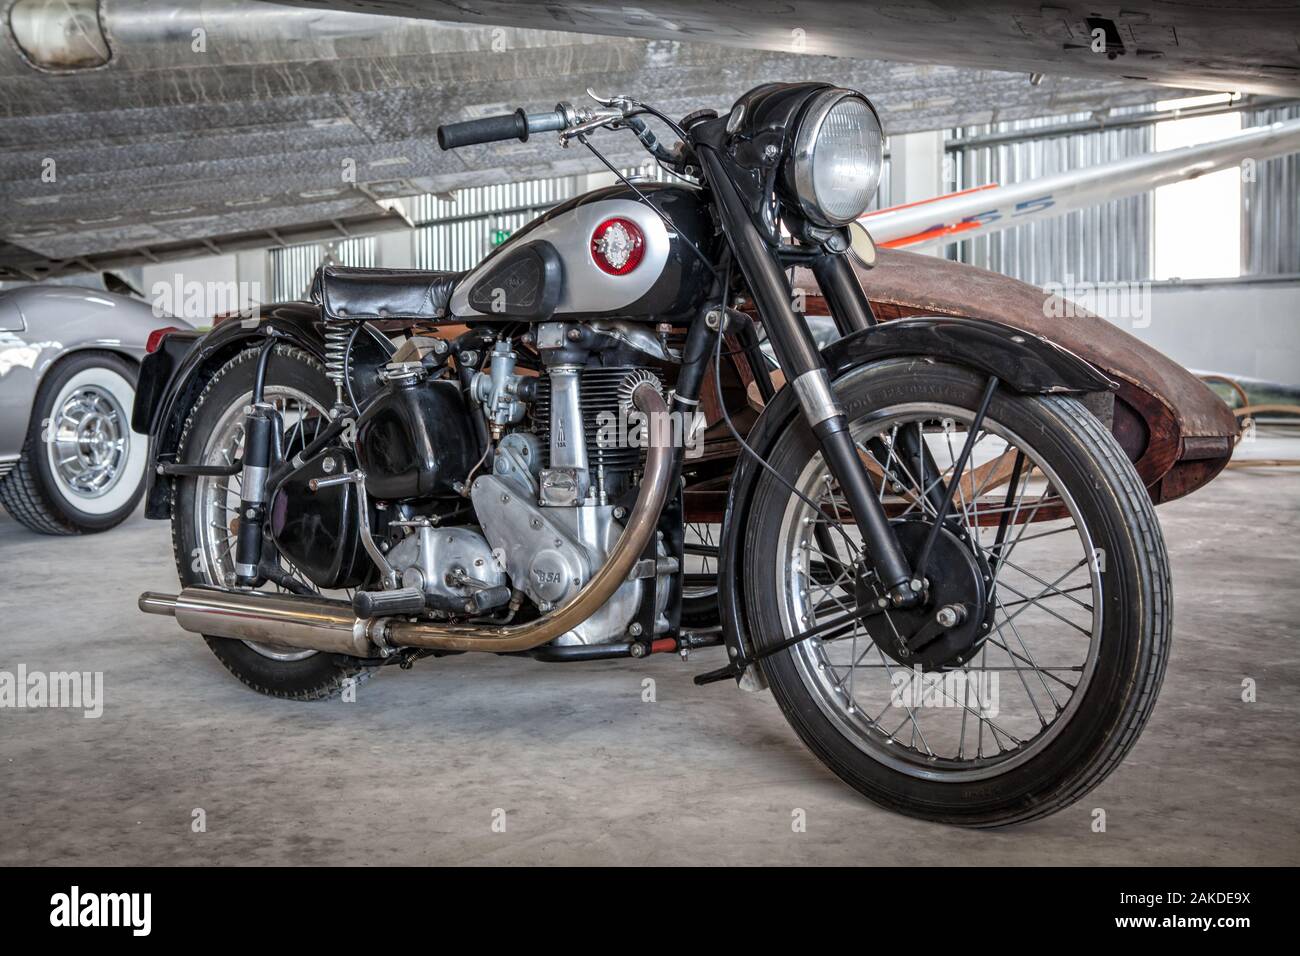 Old Bsa Motorcycle High Resolution Stock Photography and Images - Alamy